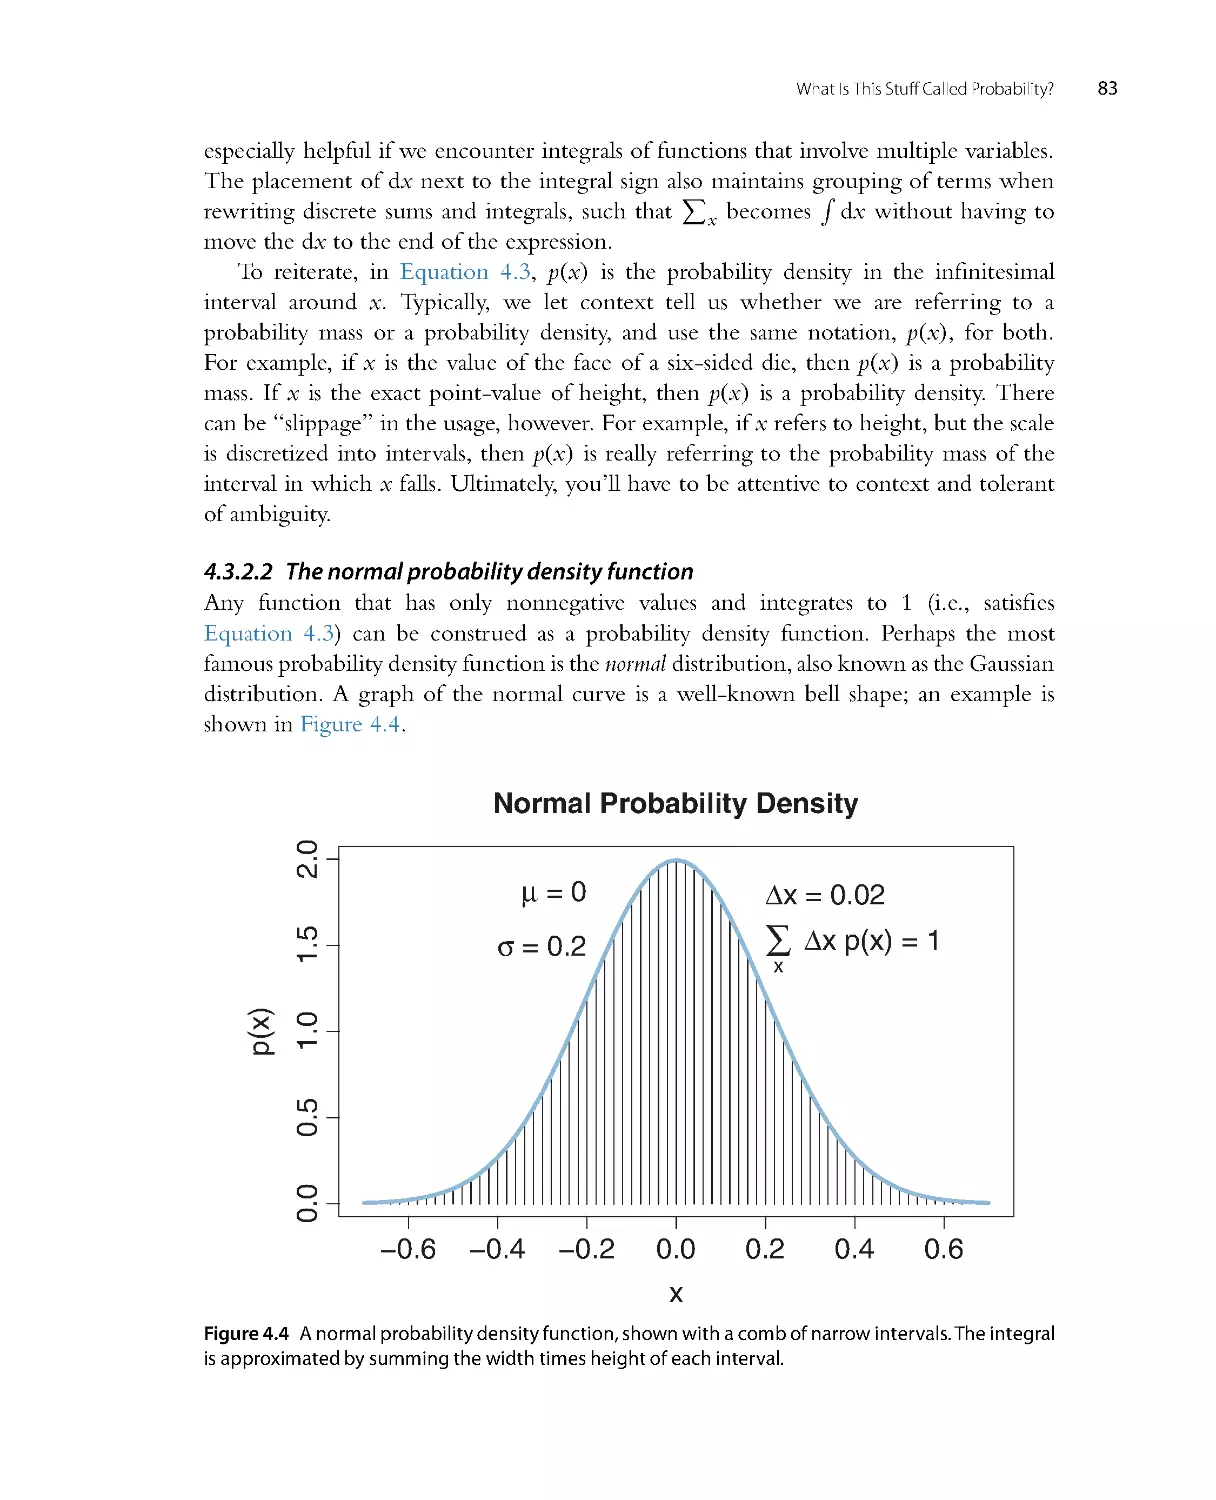 The normal probability density function